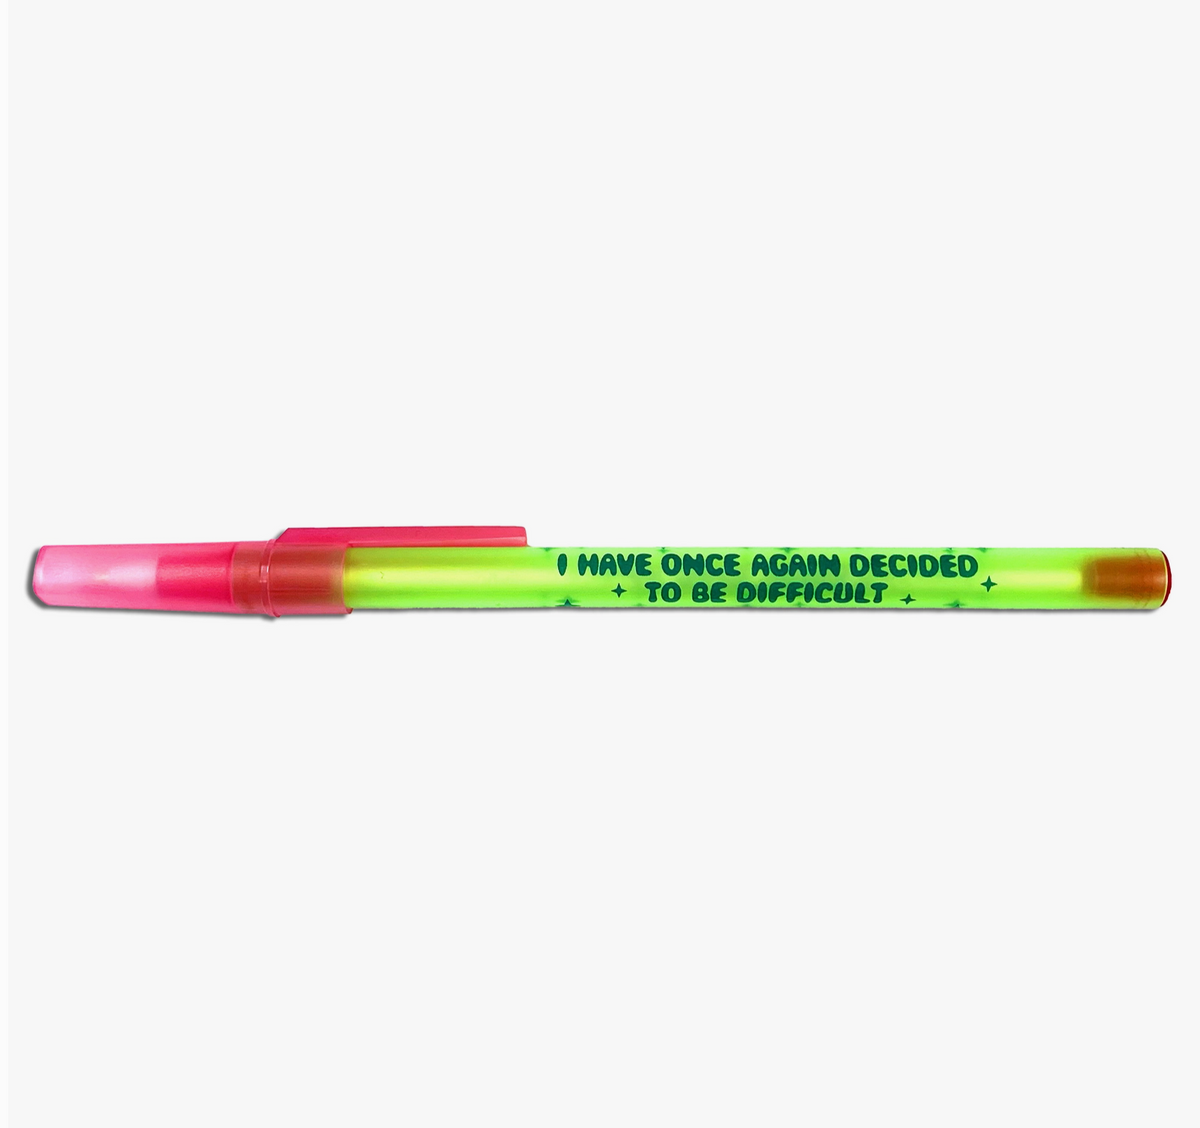 BALLPOINT: Most of my life I've been anti-ballpoint. I'm a